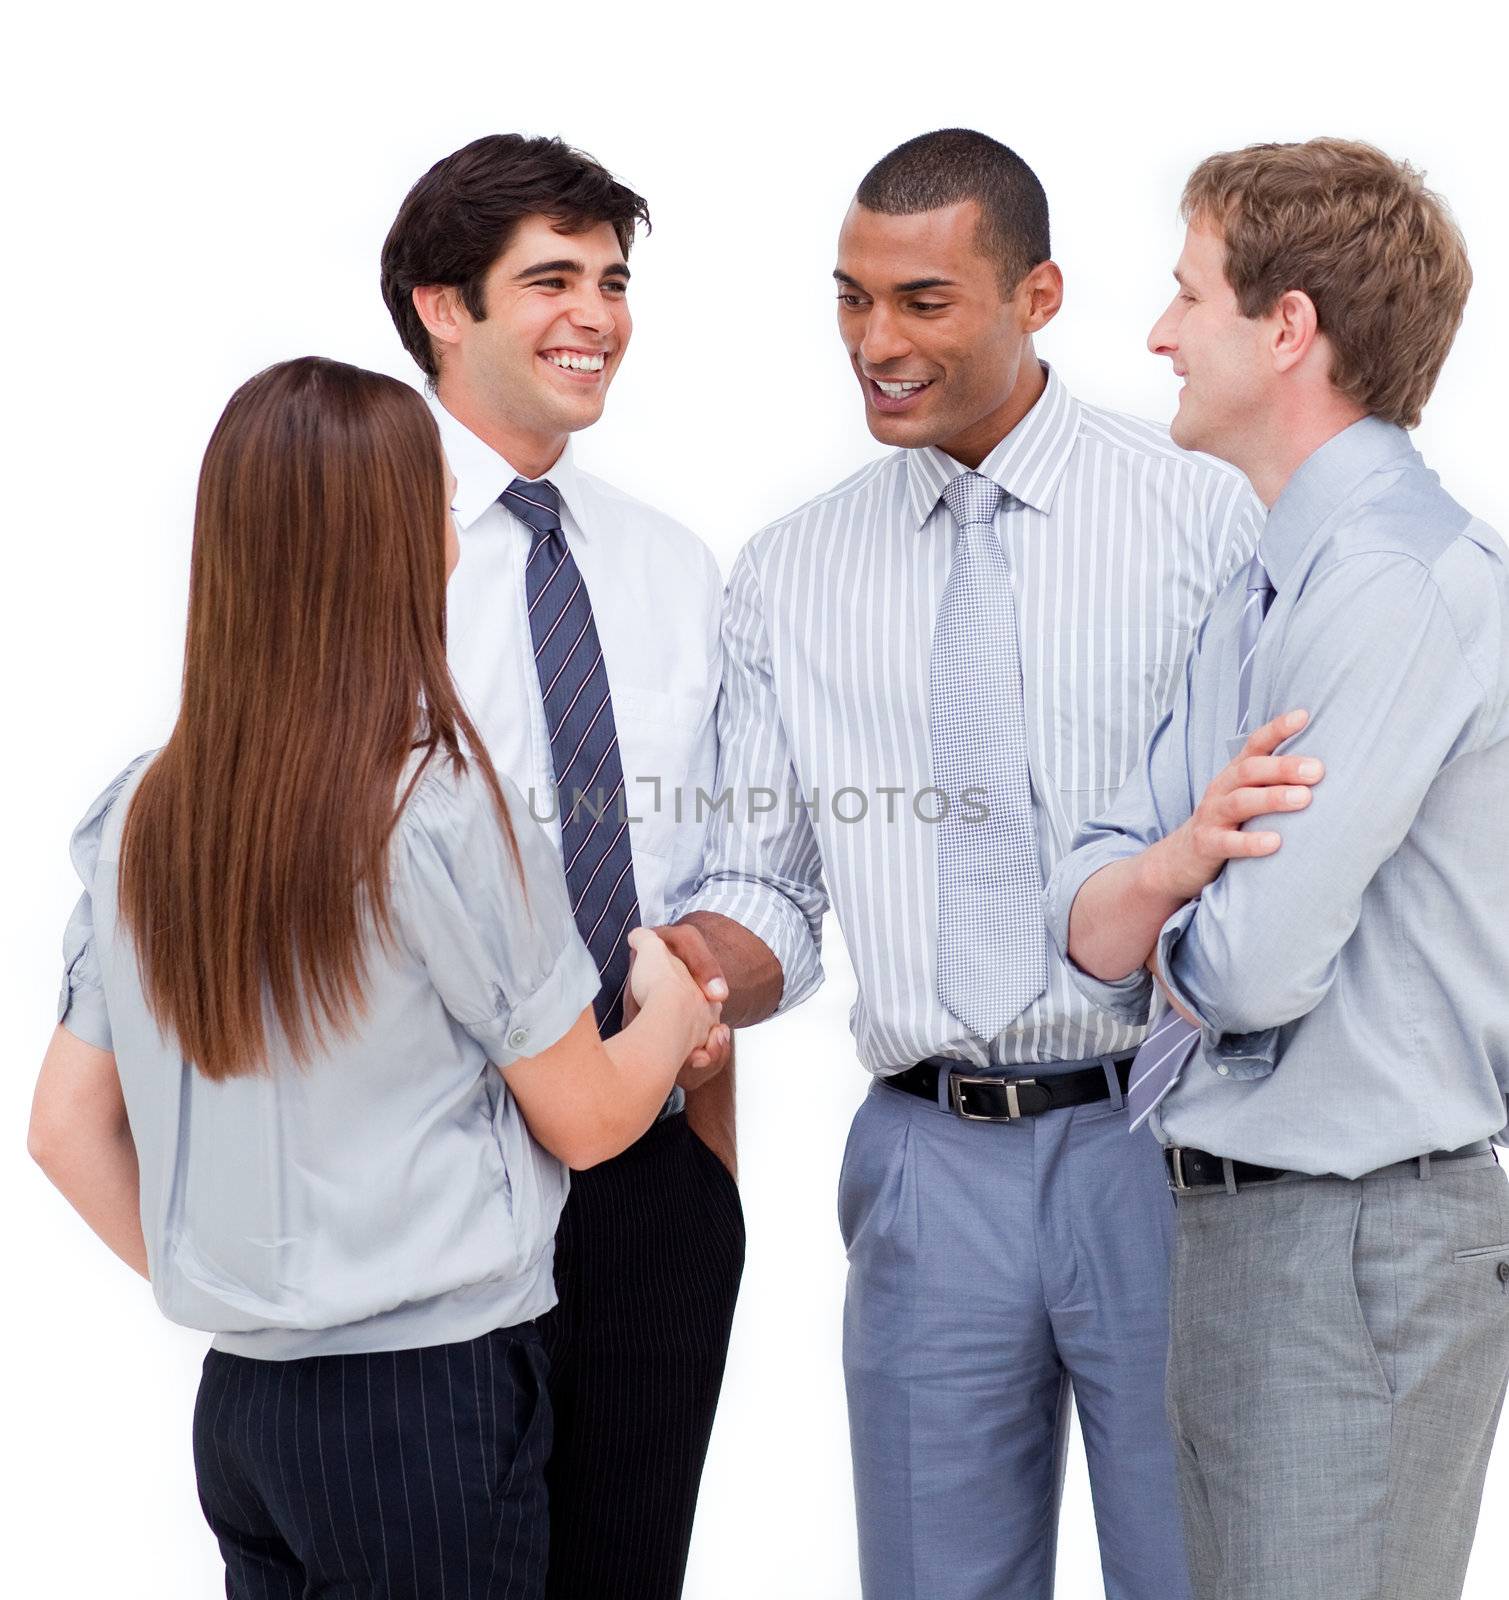 Business people shaking hands isolated on a white background